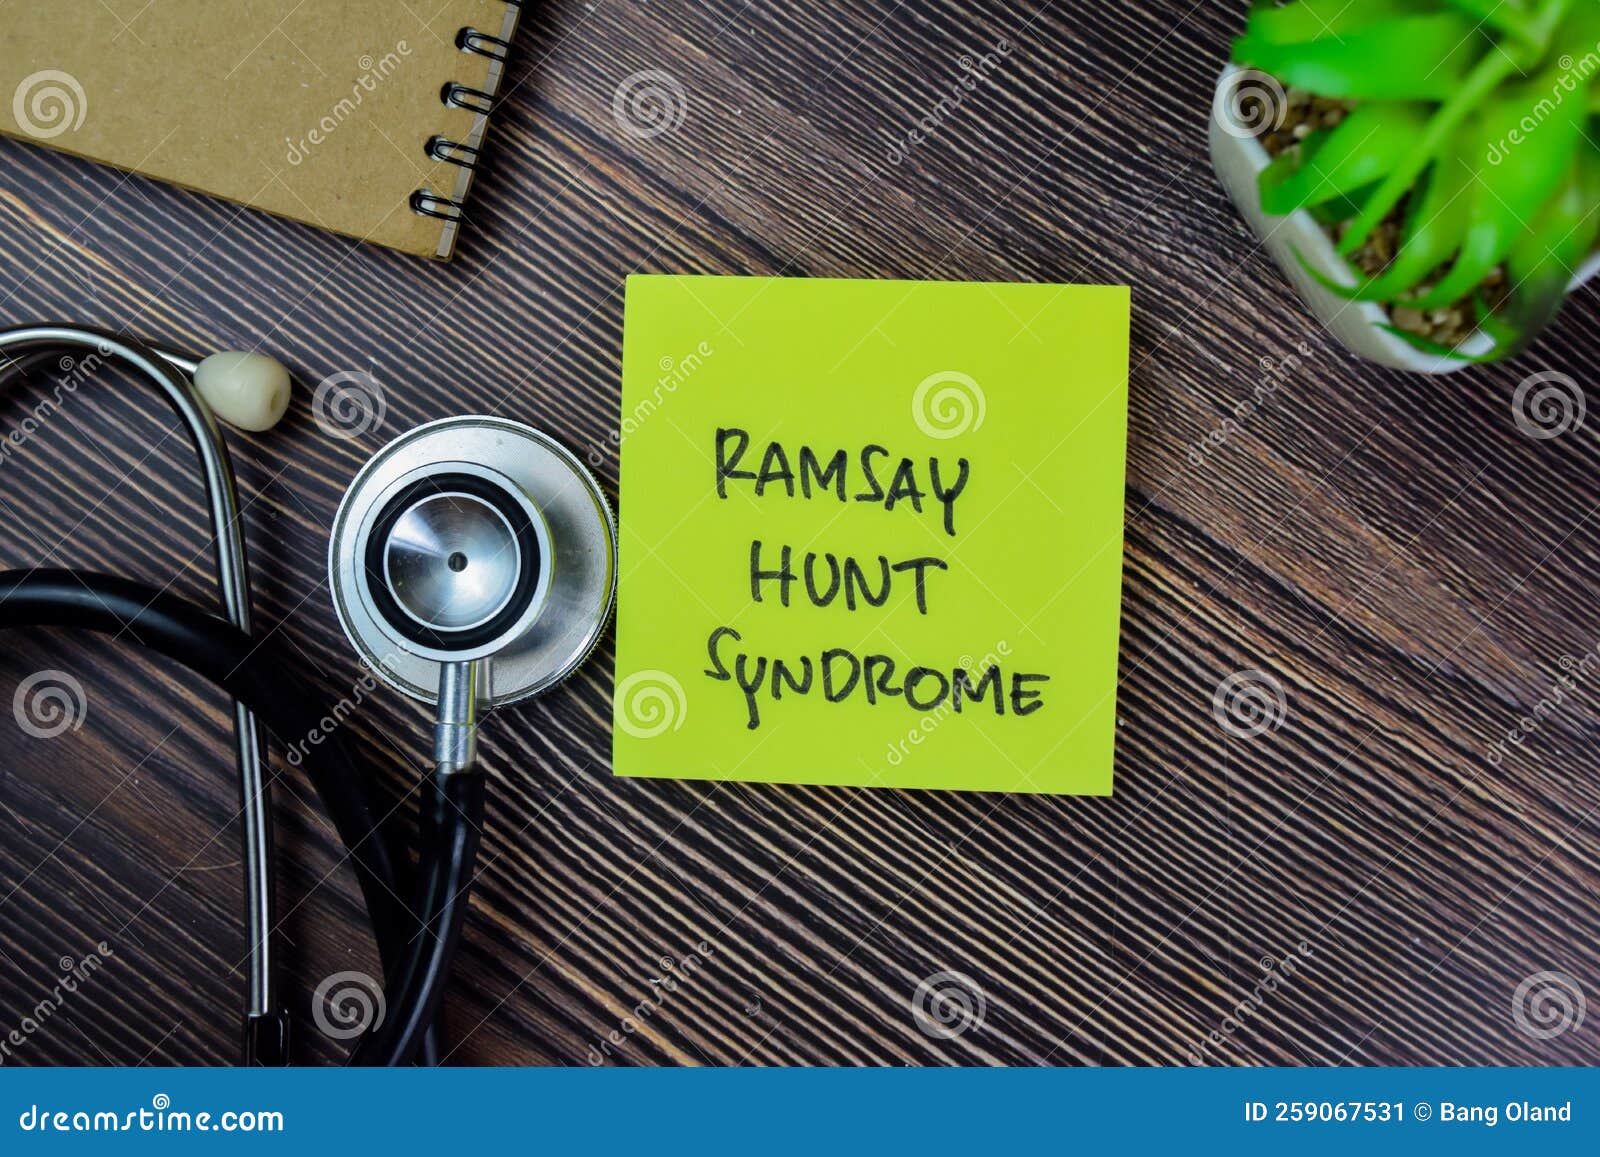 concept of ramsay hunt syndrome write on sticky notes with stethoscope  on wooden table